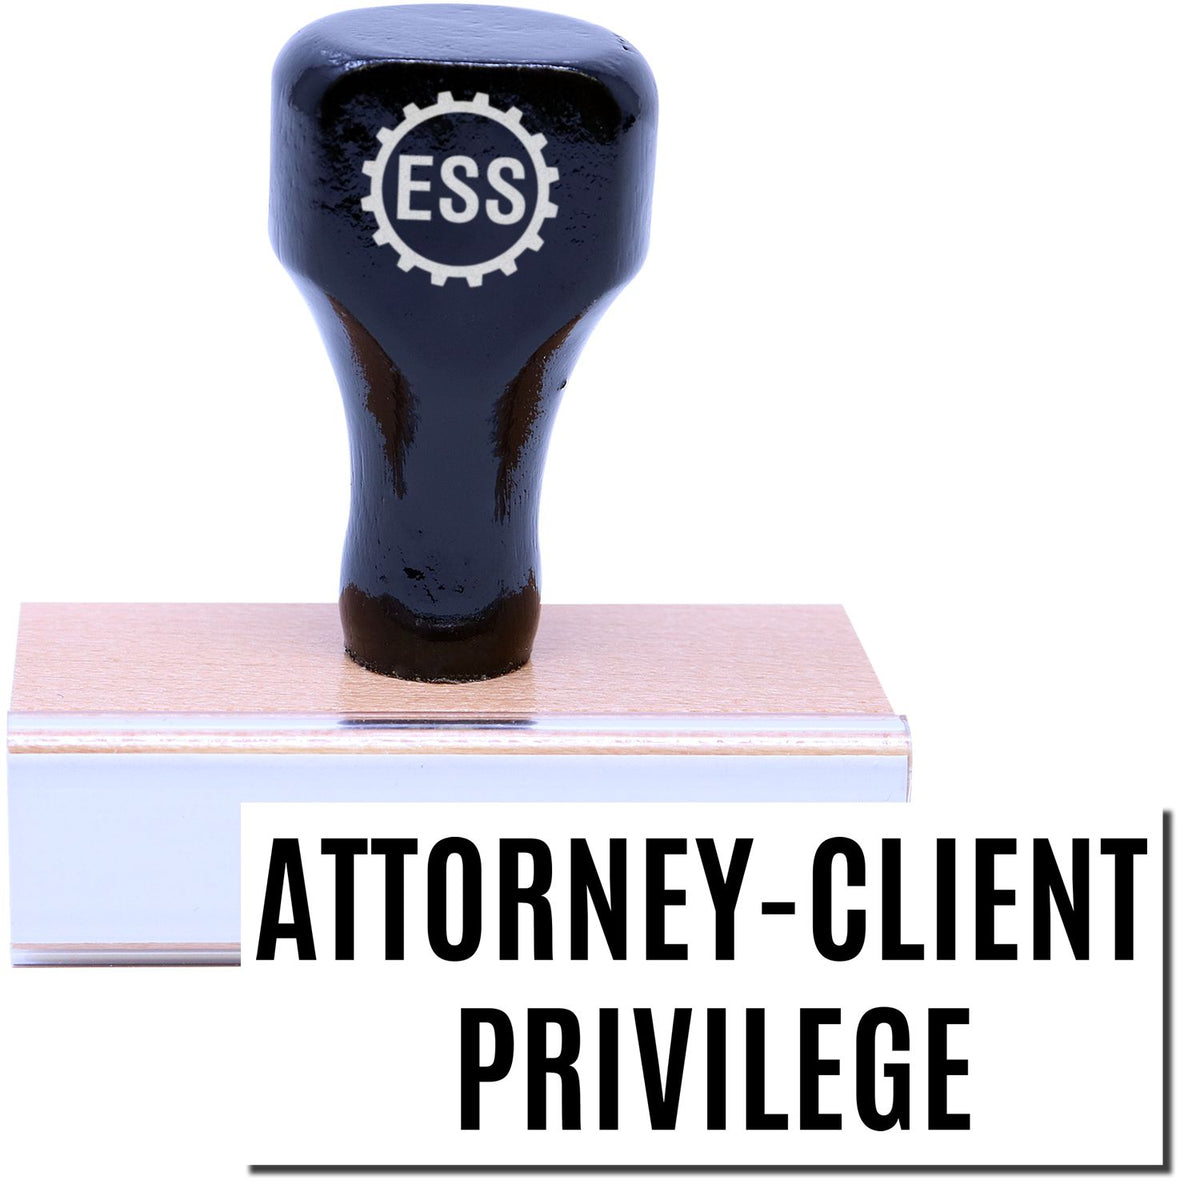 A stock office rubber stamp with a stamped image showing how the text &quot;ATTORNEY-CLIENT PRIVILEGE&quot; is displayed after stamping.